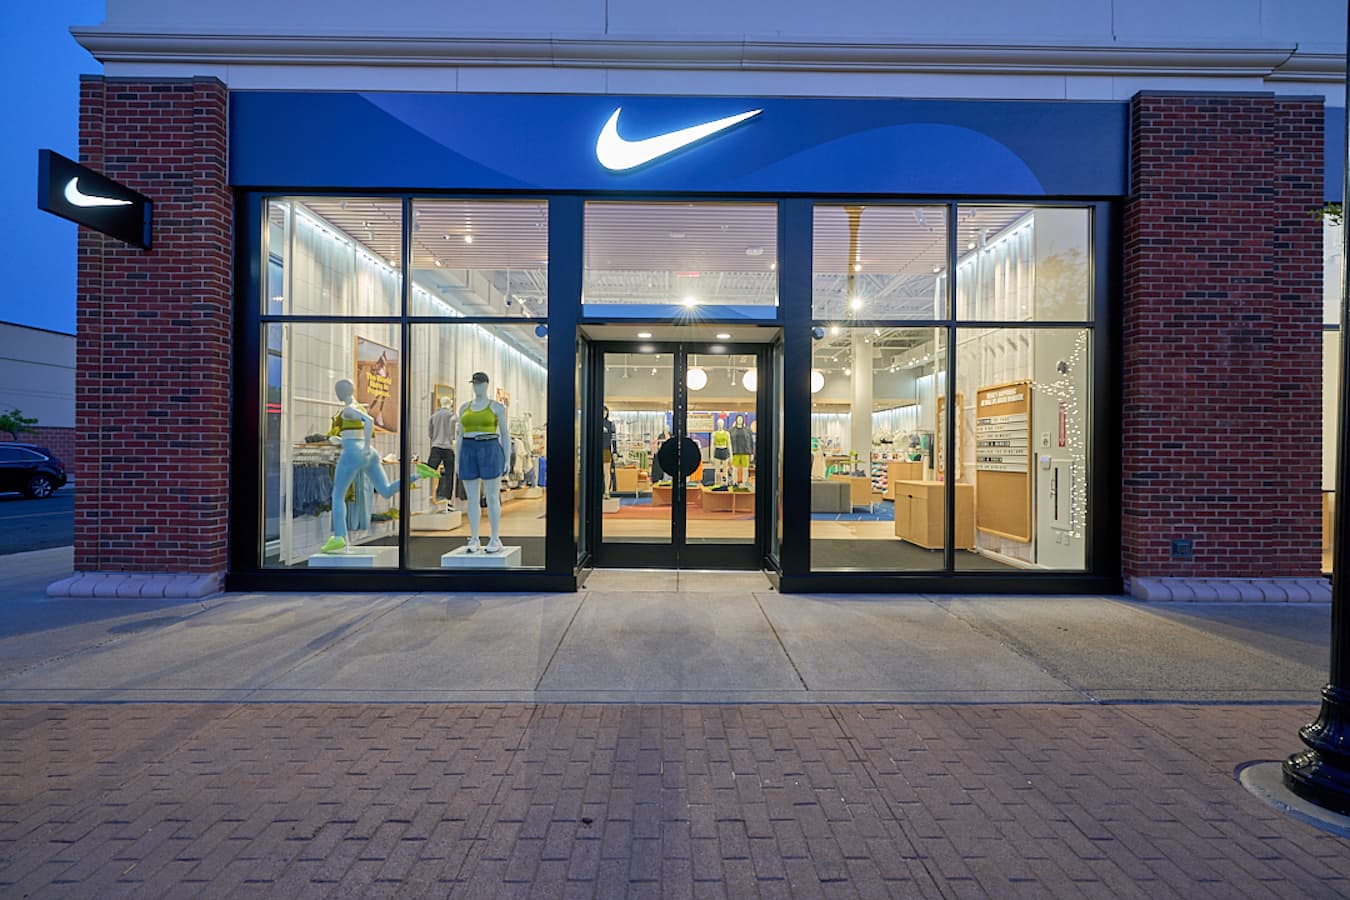 Nike Stores in Connecticut, States. Nike.com